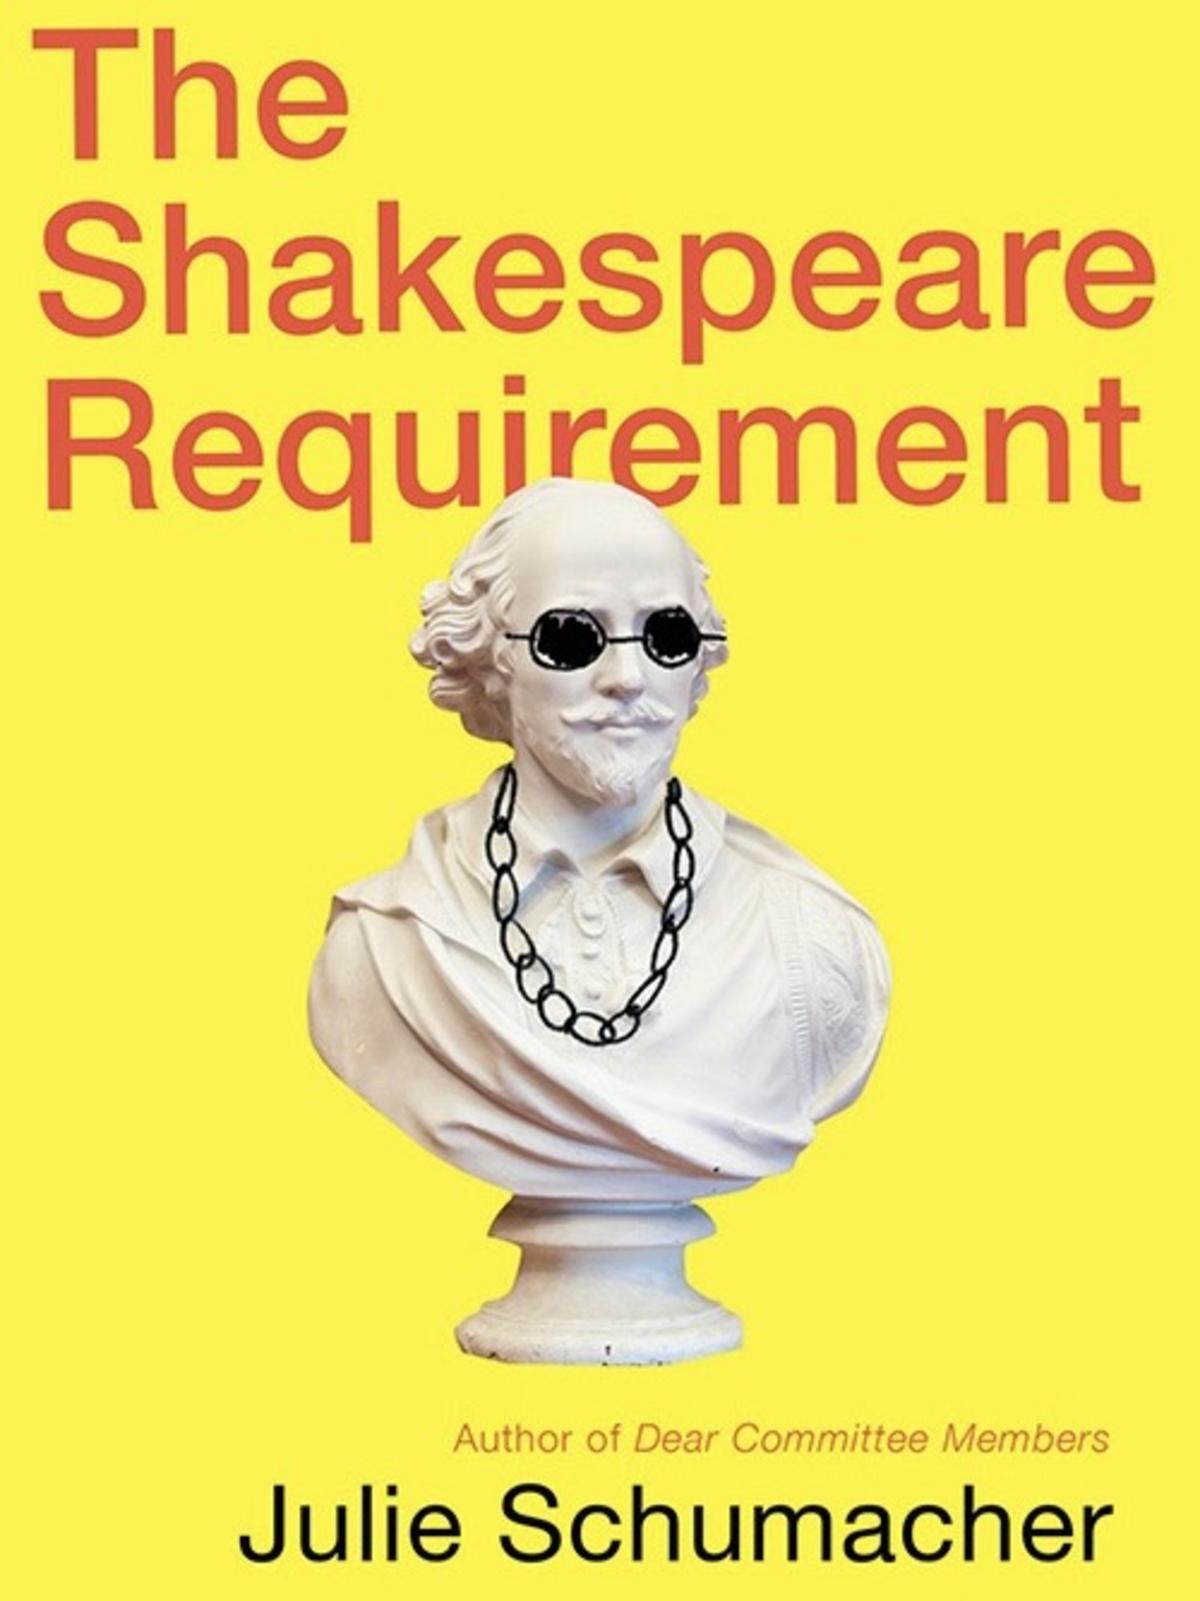 The Shakespeare Requirement, book cover